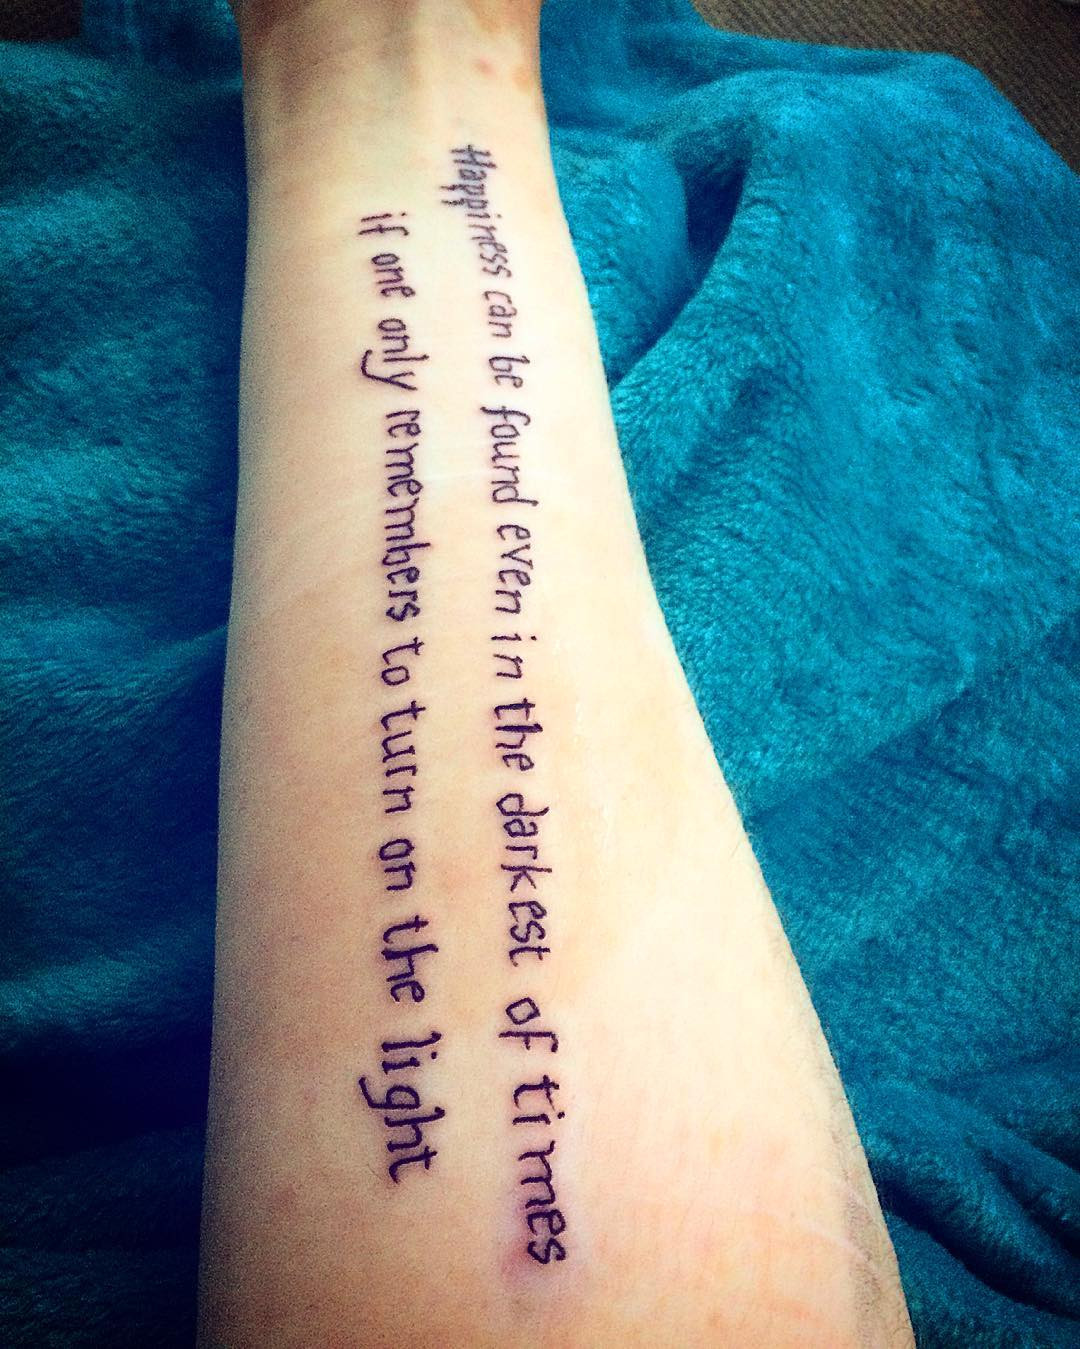 30 Of the Best Ideas for Motivational Quote Tattoos - Home, Family ...